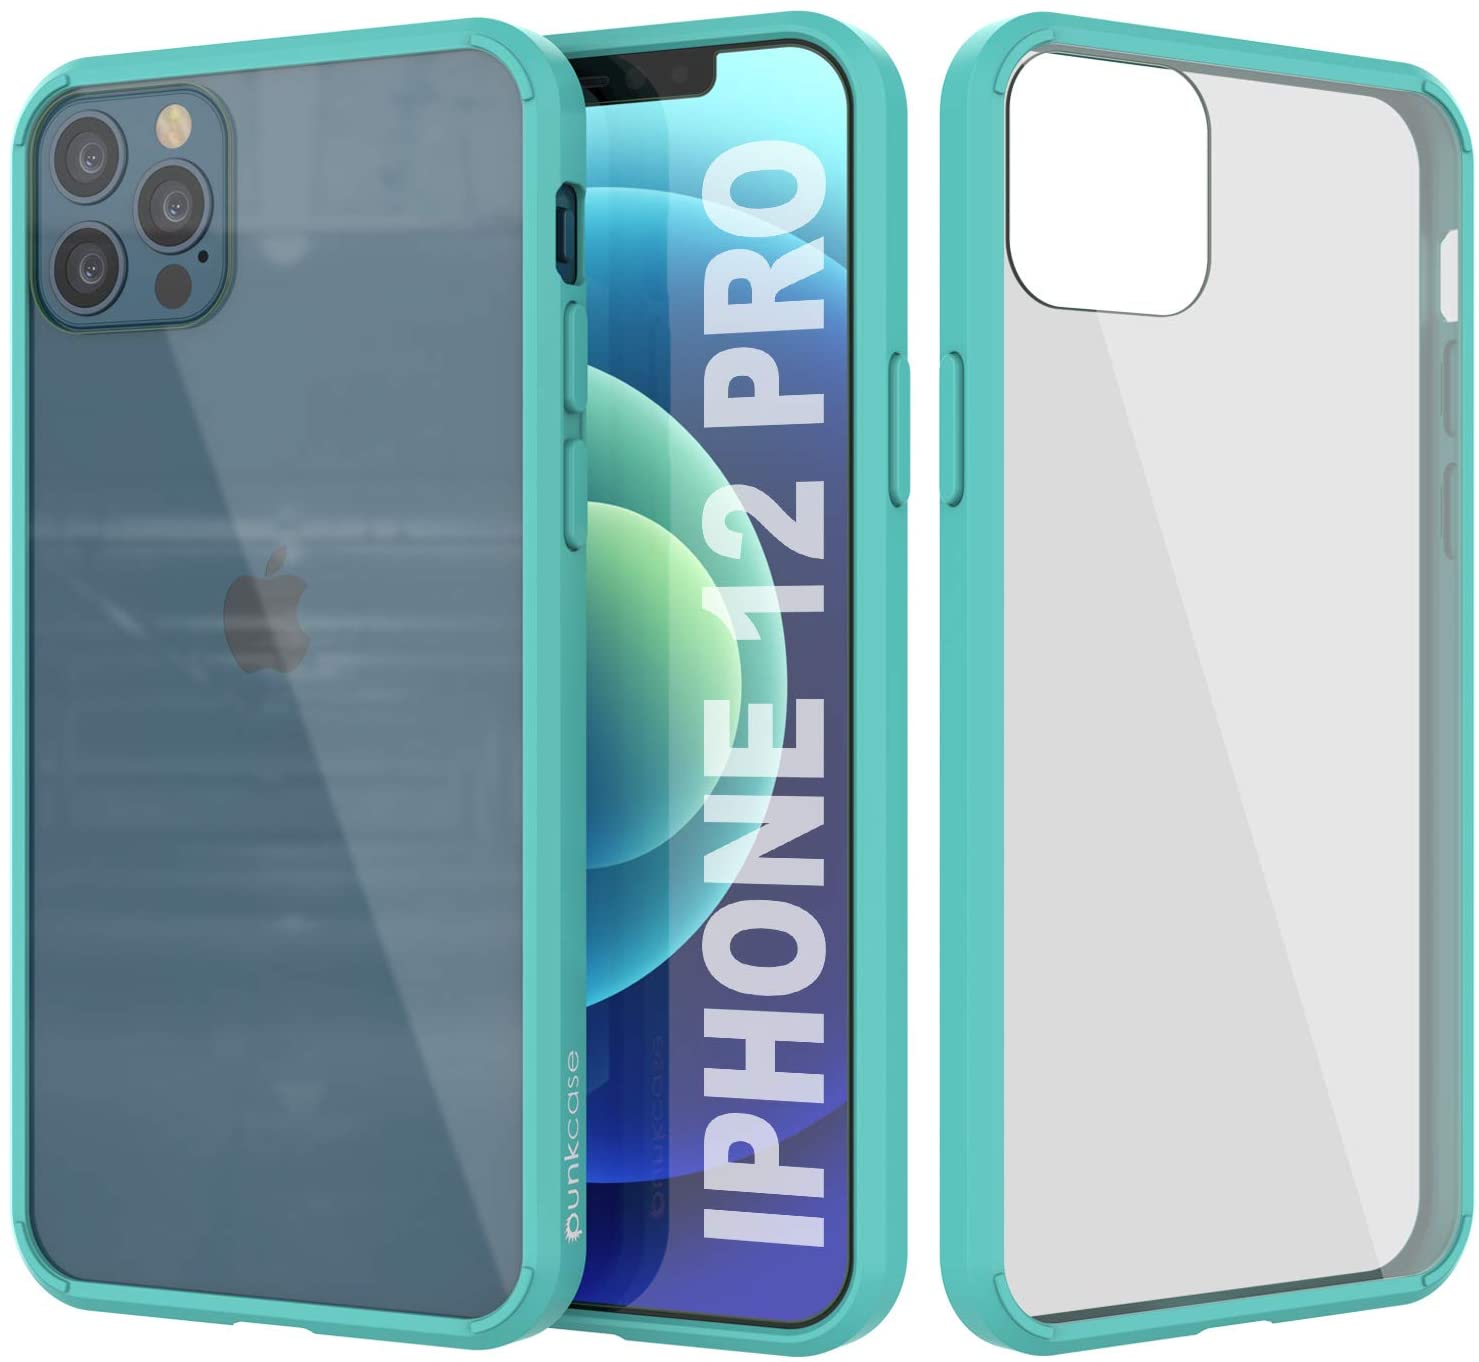 iPhone 12 Pro Case Punkcase® LUCID 2.0 Teal Series w/ PUNK SHIELD Screen Protector | Ultra Fit (Color in image: teal)